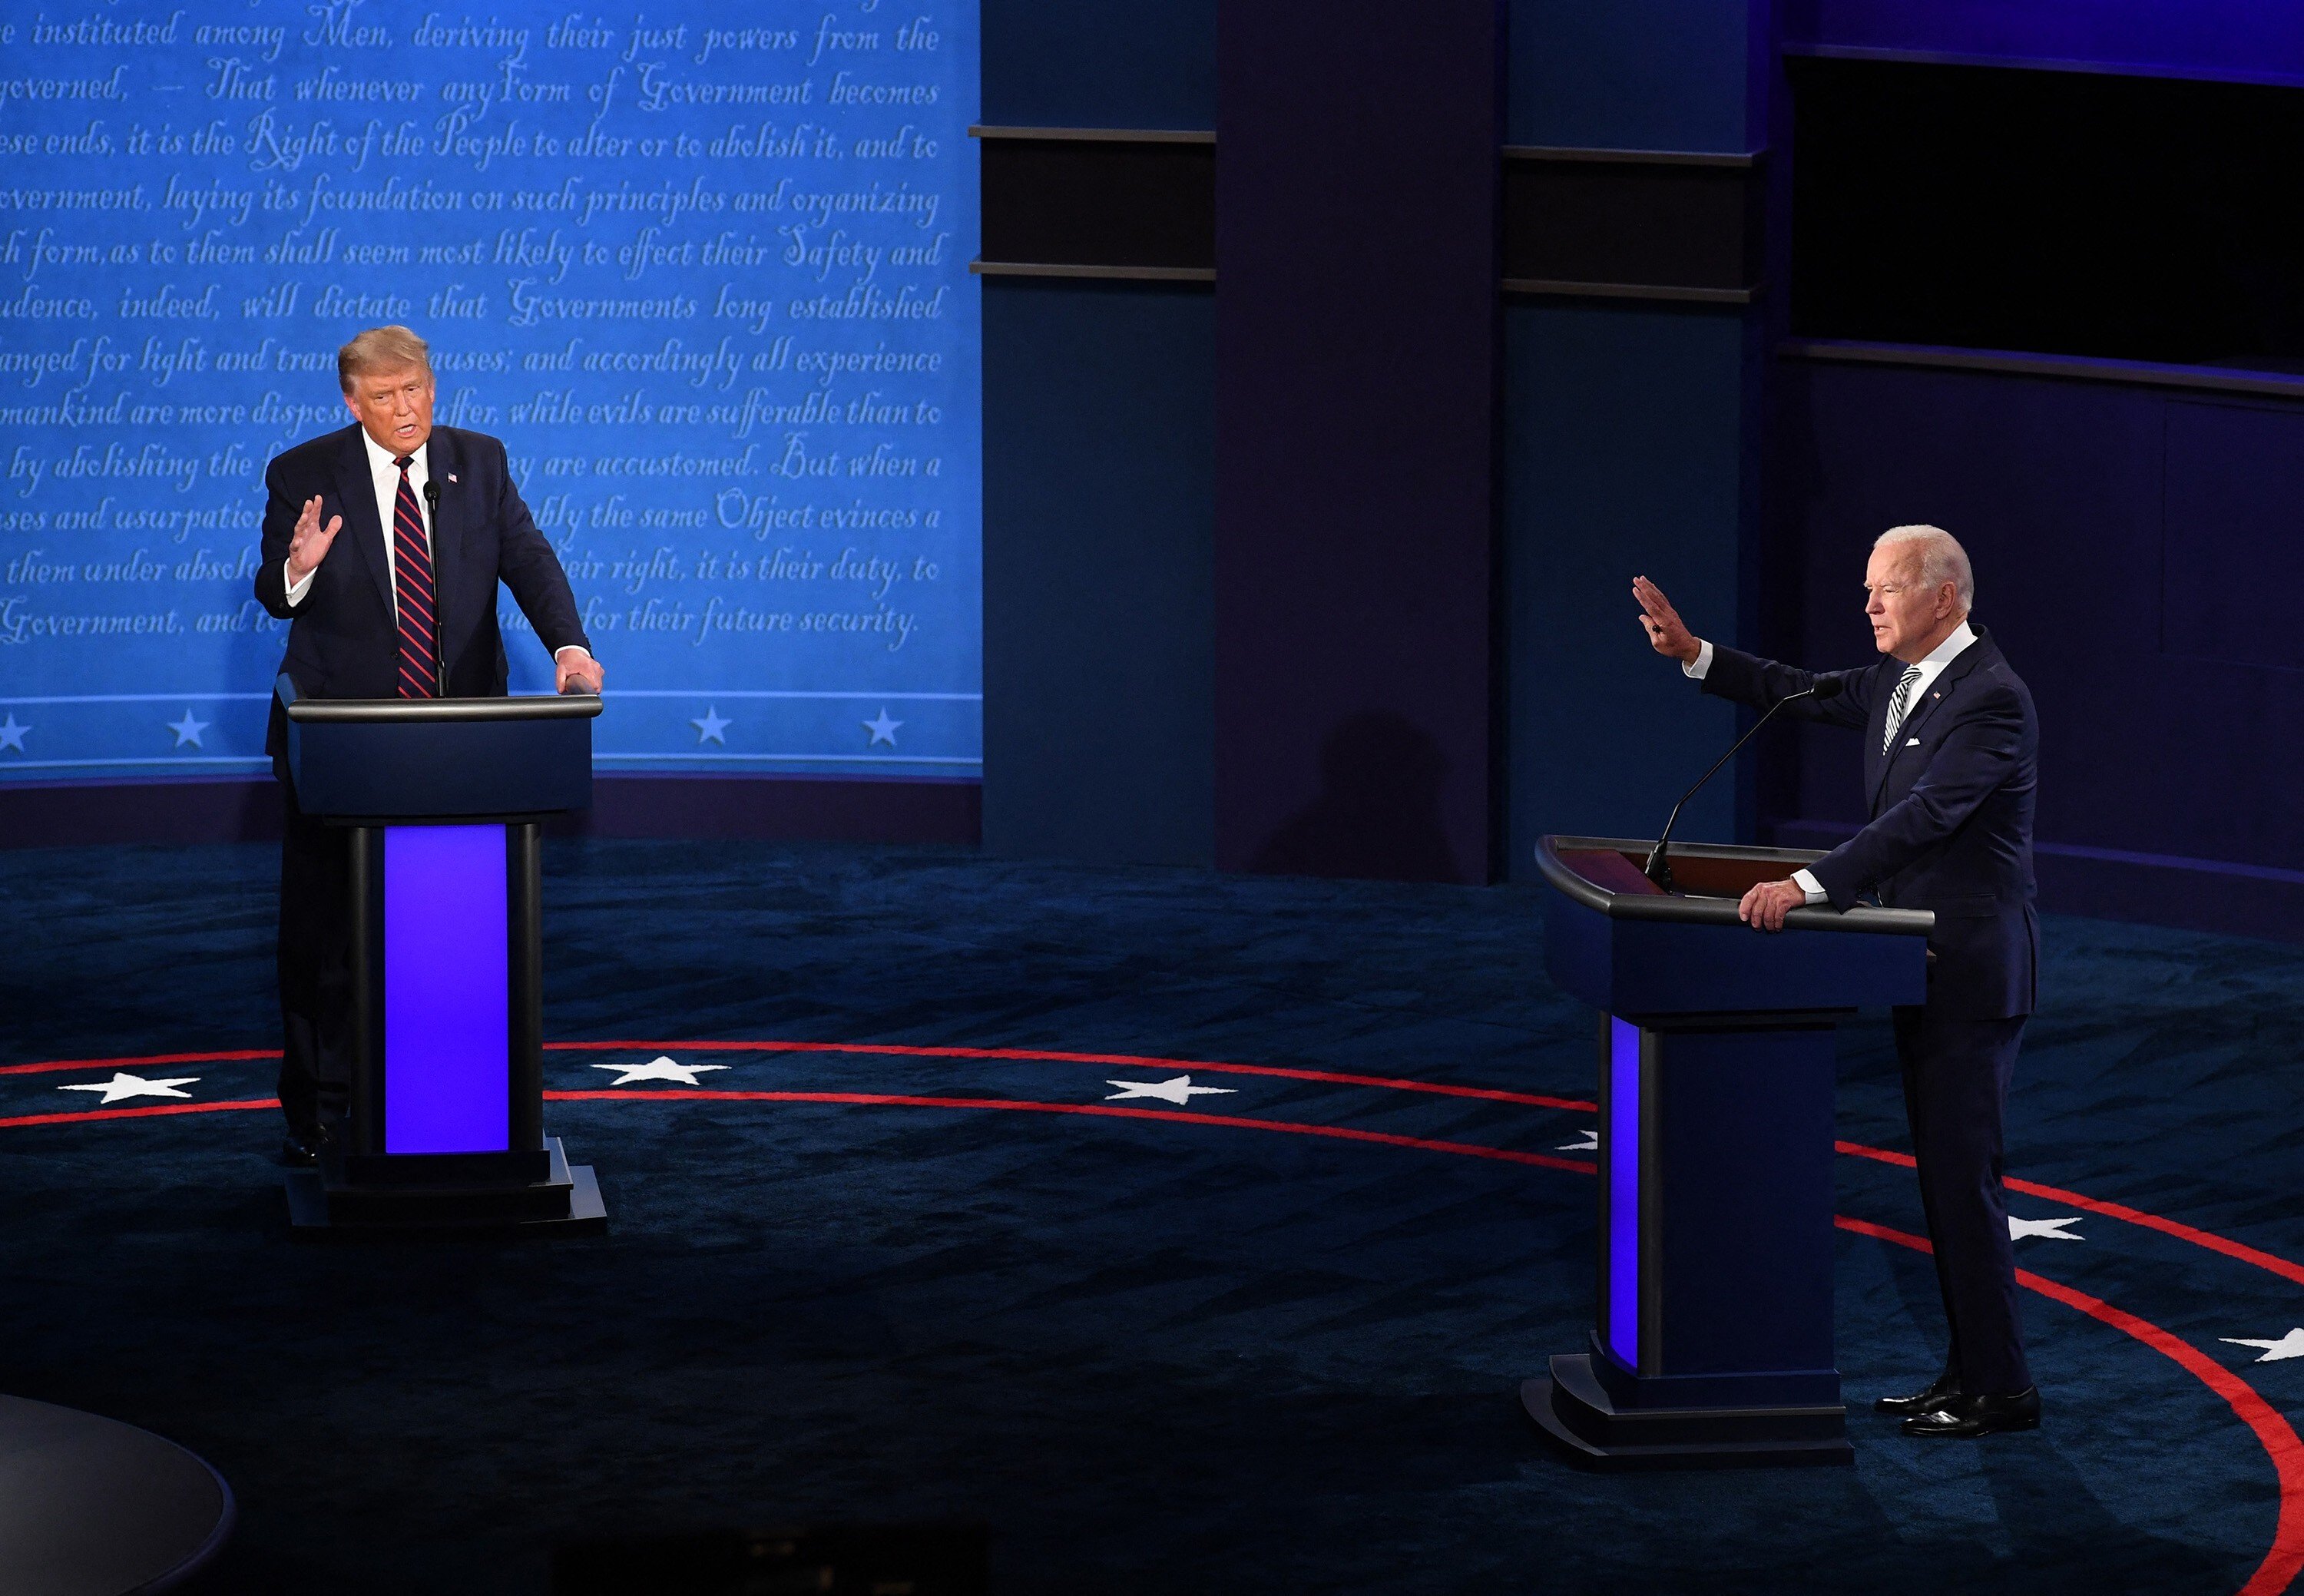 US President Donald Trump, left, and Democratic presidential nominee Joe Biden speak during the first presidential debate in Cleveland on September 29. If Trump loses next month’s election, he and his staff could be tempted to engage in scorched-earth tactics on their way out of the White House. Photo: TNS